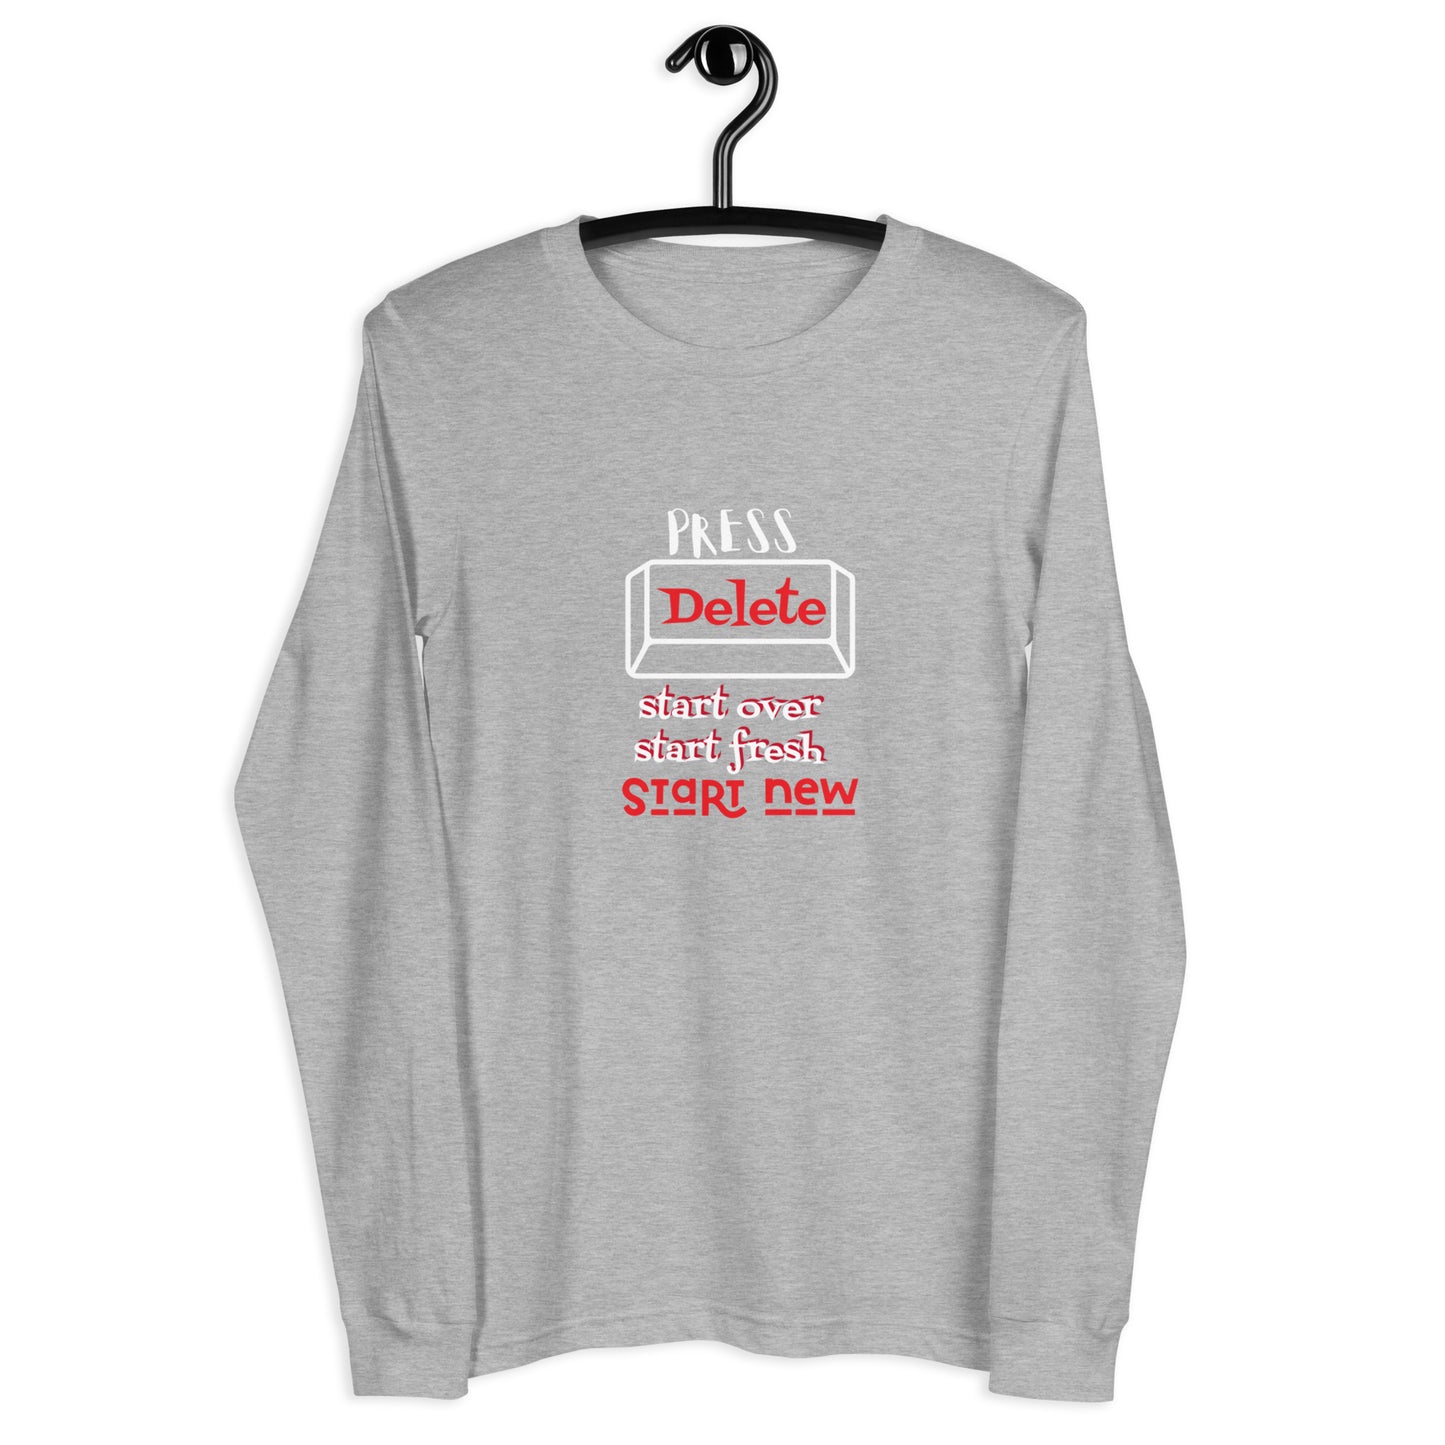 Press Delete Long Sleeve Unisex T-Shirt - Nspirations Collection